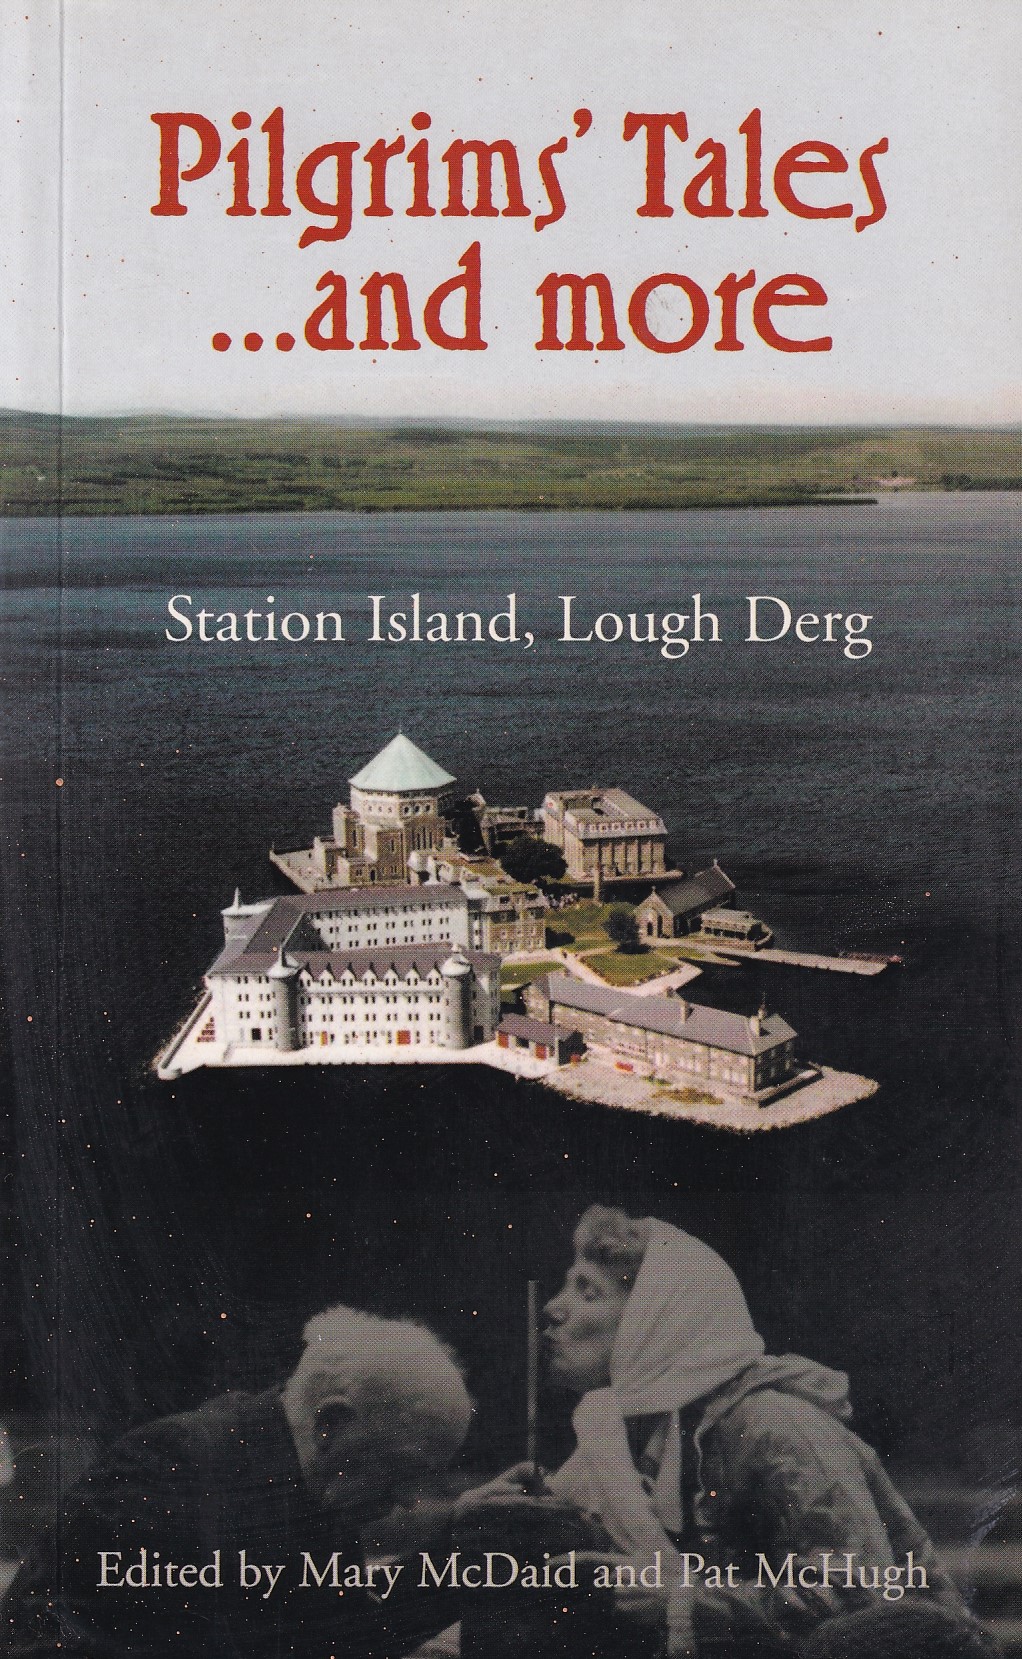 Pilgrims’ Tales … and More: Station Island, Lough Derg | Mary McDaid & Pat McHugh (eds.) | Charlie Byrne's